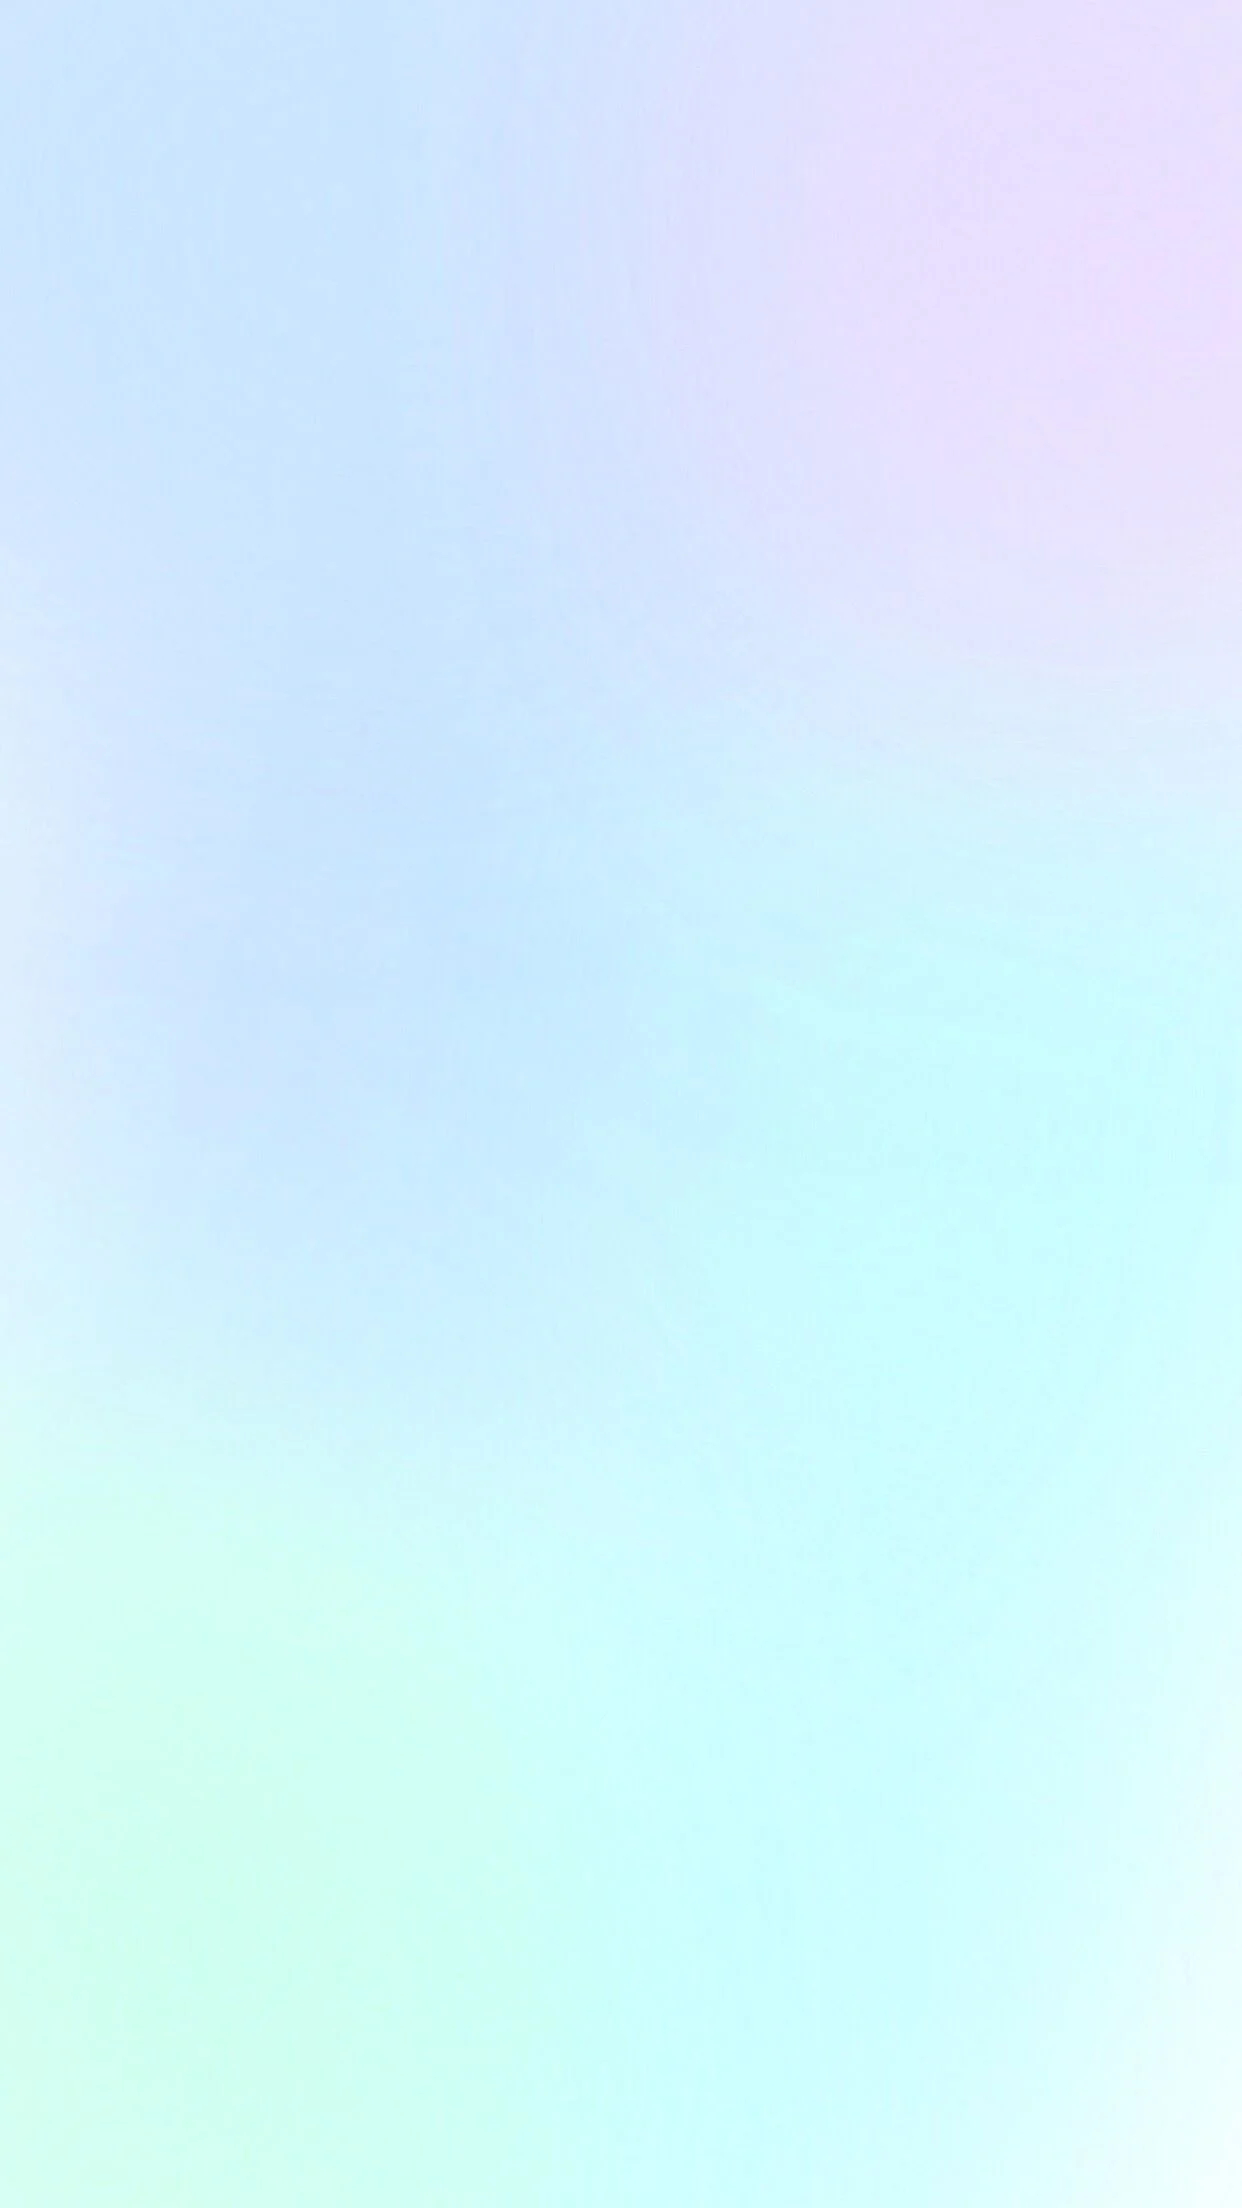 1242x2208 Purple and Blue Pastel Wallpapers Top Free Purple and Blue Pastel Backgrounds